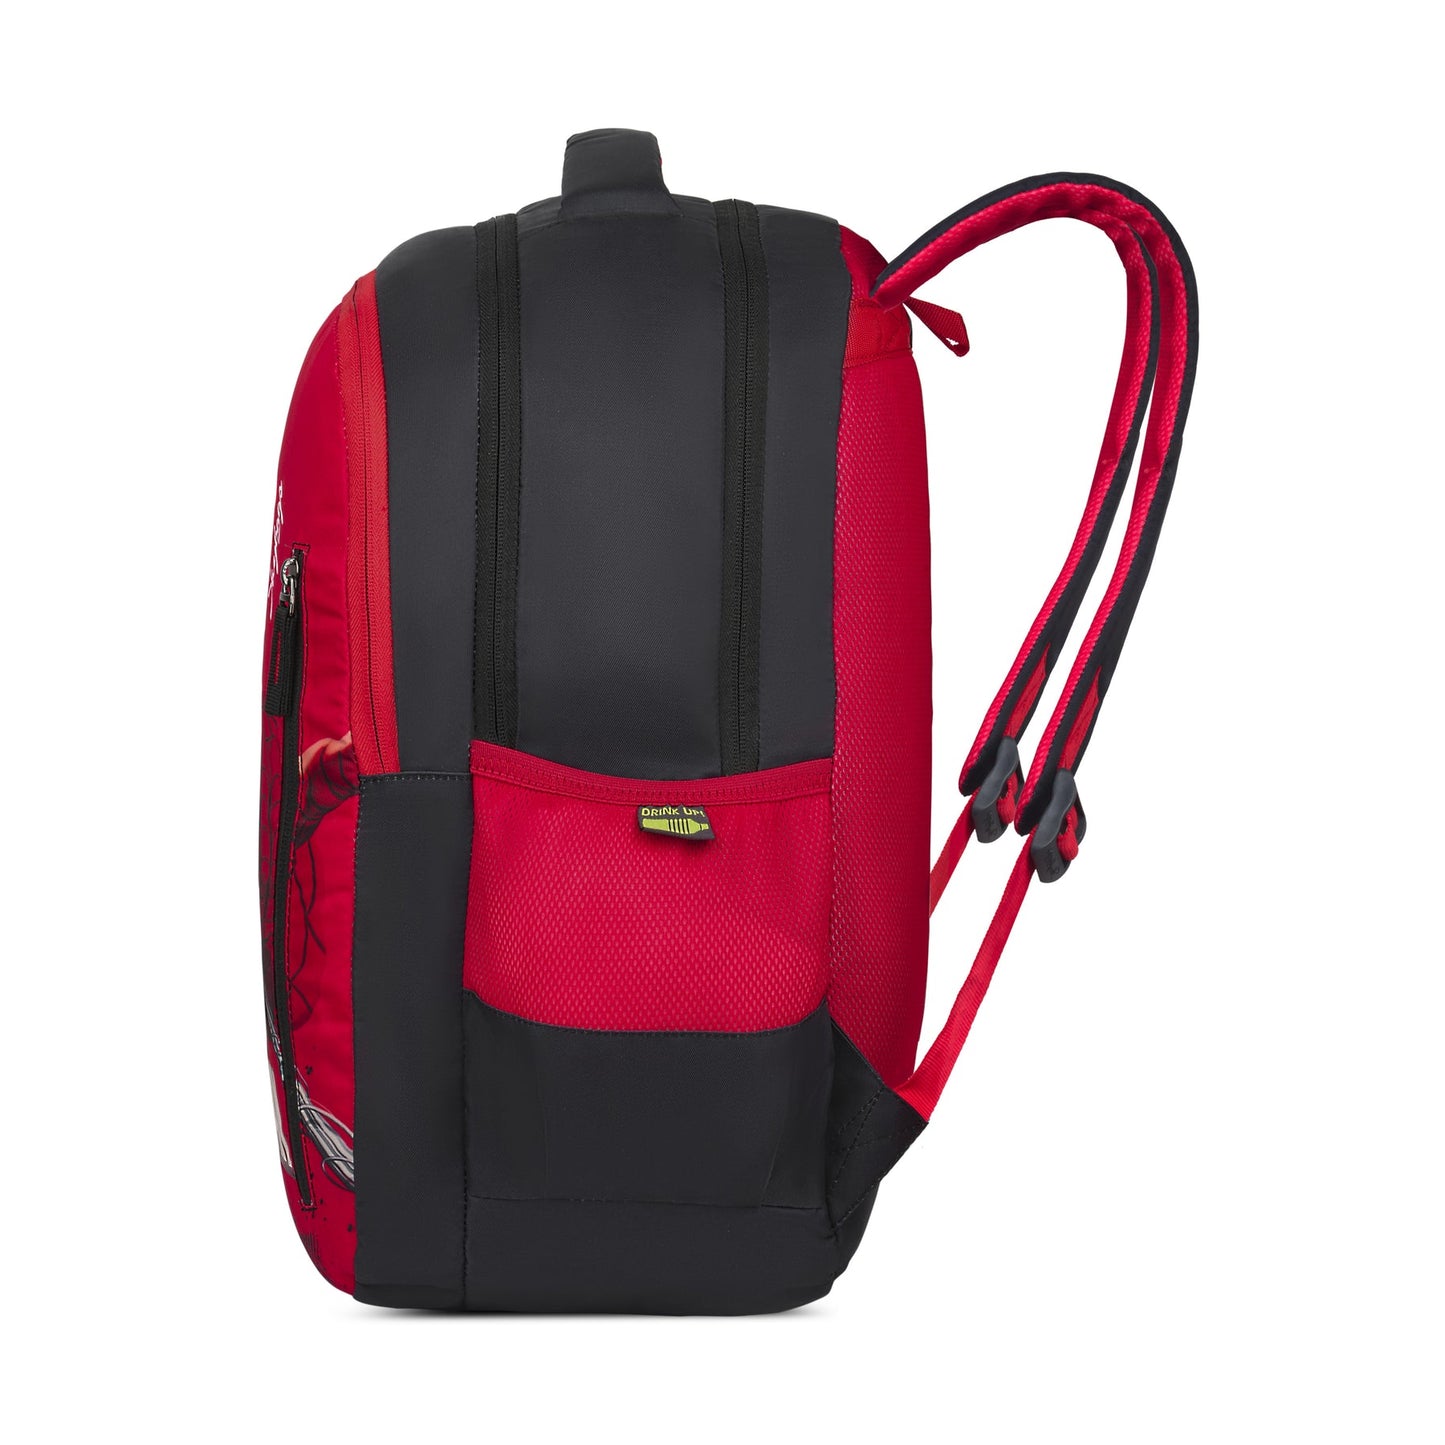 Skybags Marvel Spiderman 02 25L Backpack